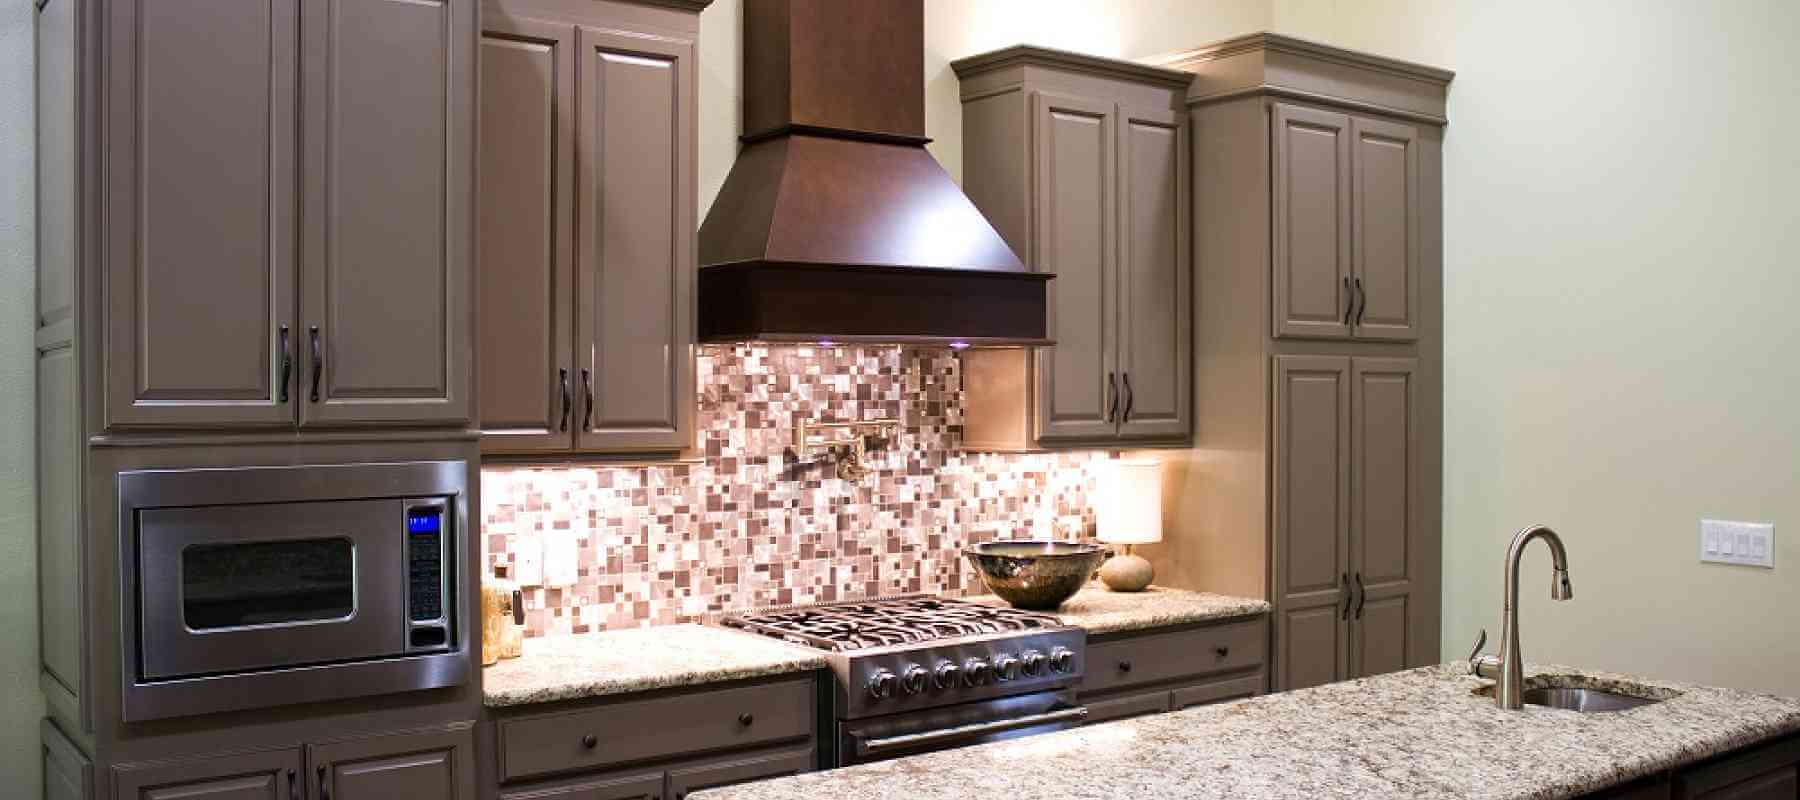 Are Your Cabinets Built To Last?